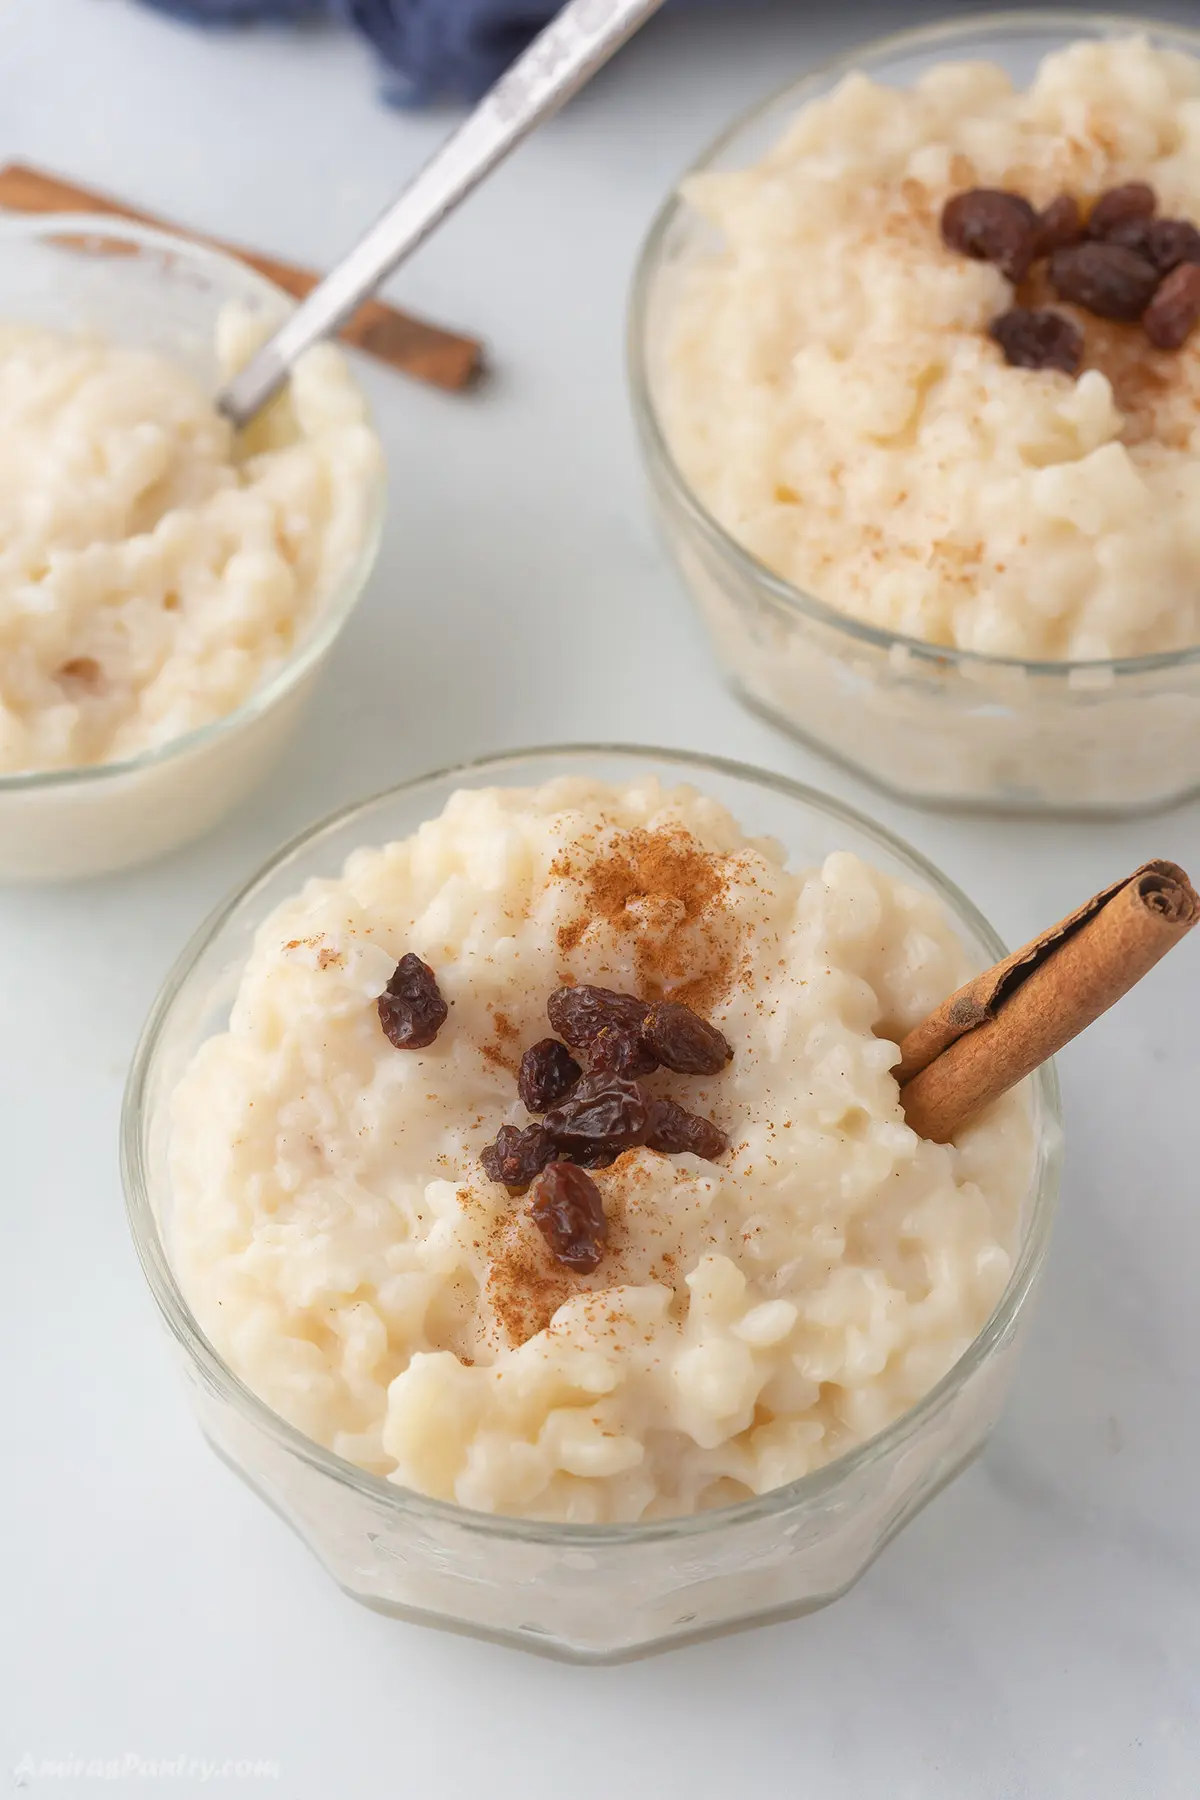 An overhead view of some bowl with rice pudding garnished with cinnamon and raisins.